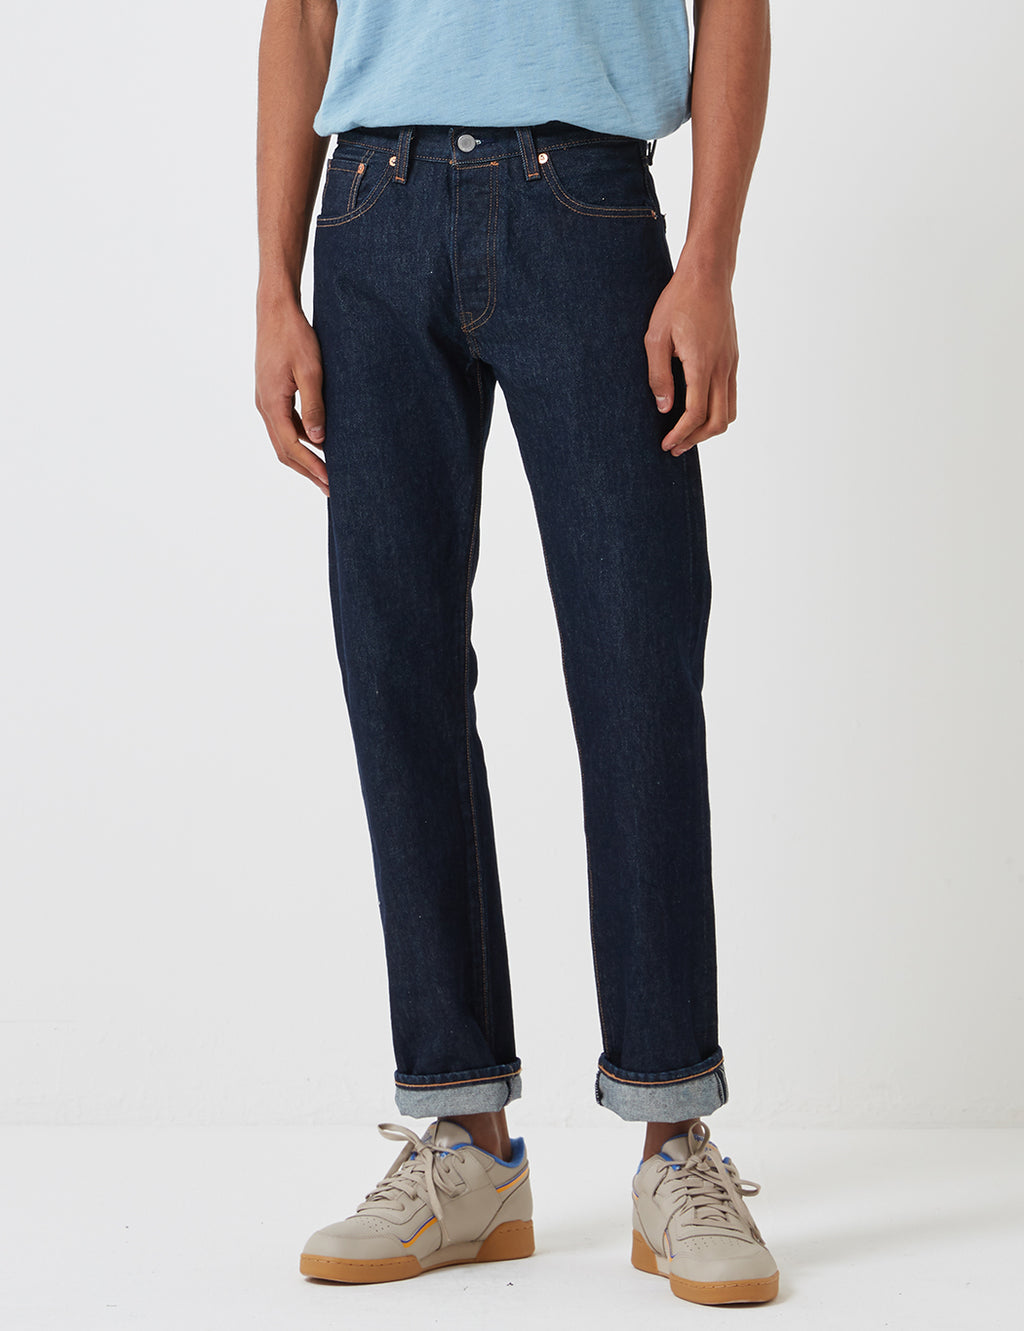 Levis Made & Crafted 501 Original Fit Jeans - Rinse | URBAN EXCESS.